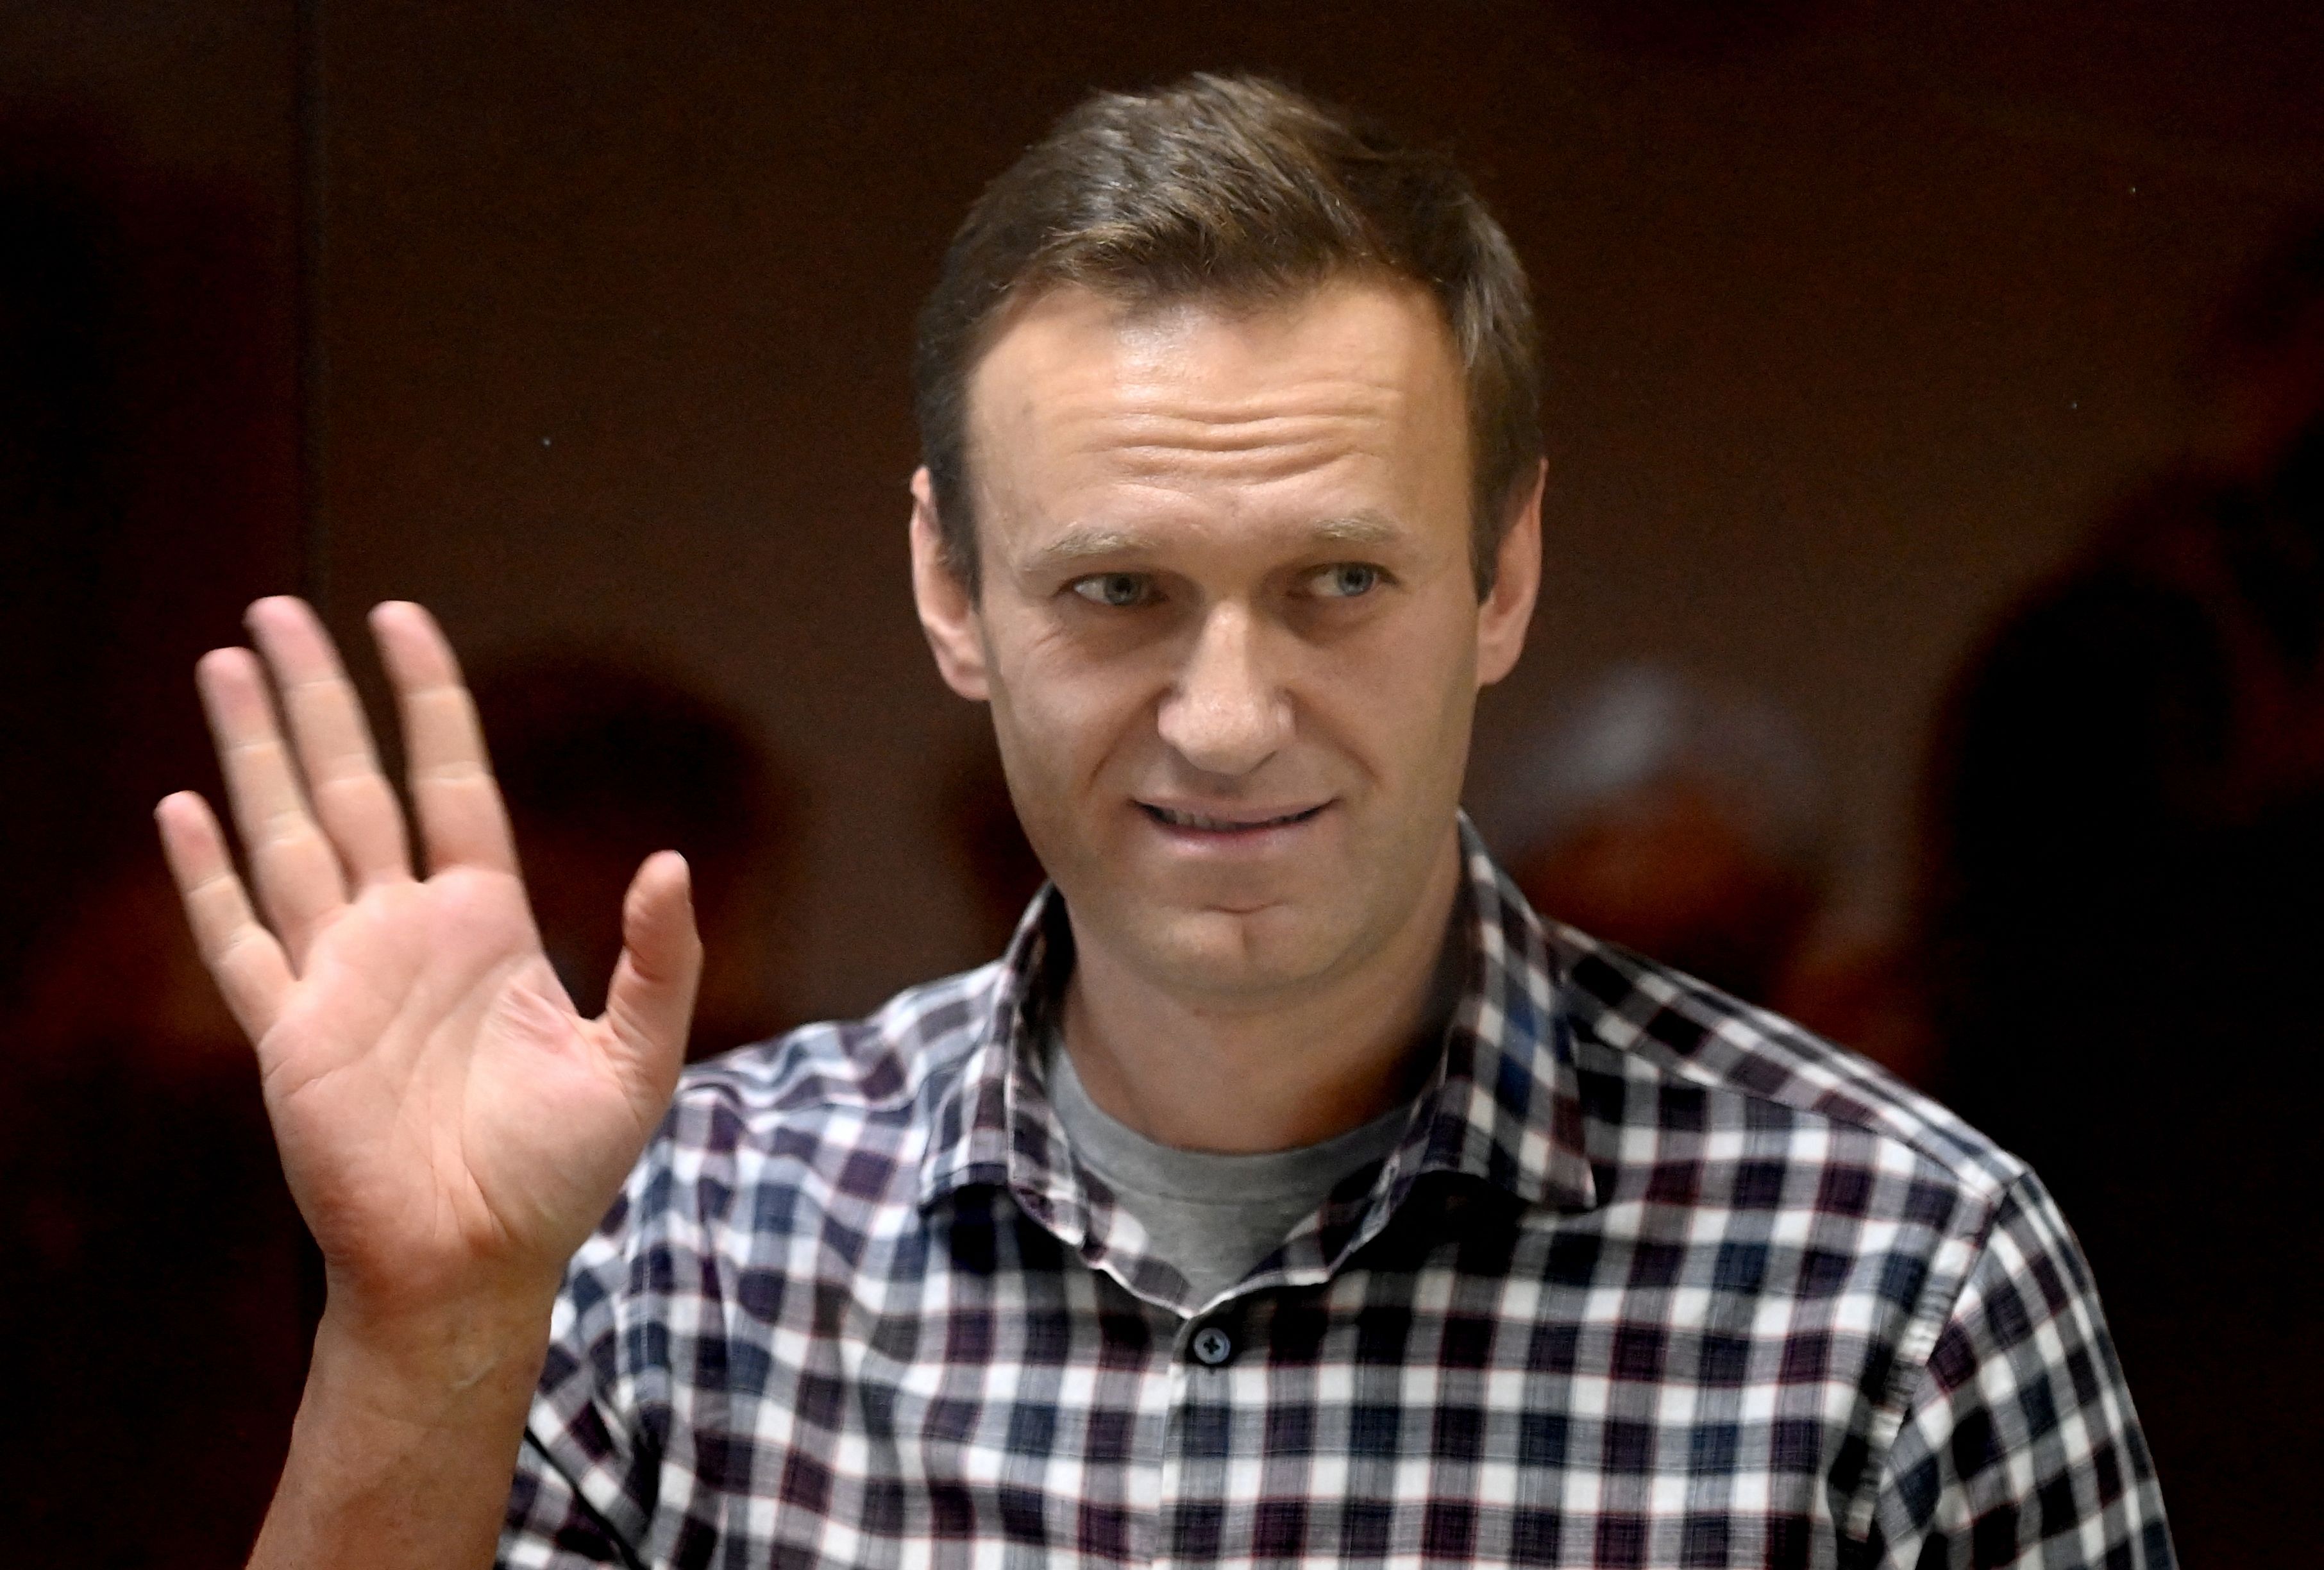  Russian opposition leader Alexei Navalny stands inside a glass cell during a court hearing at the Babushkinsky district court in Moscow on February 20, 2021. Credit: AFP File Photo